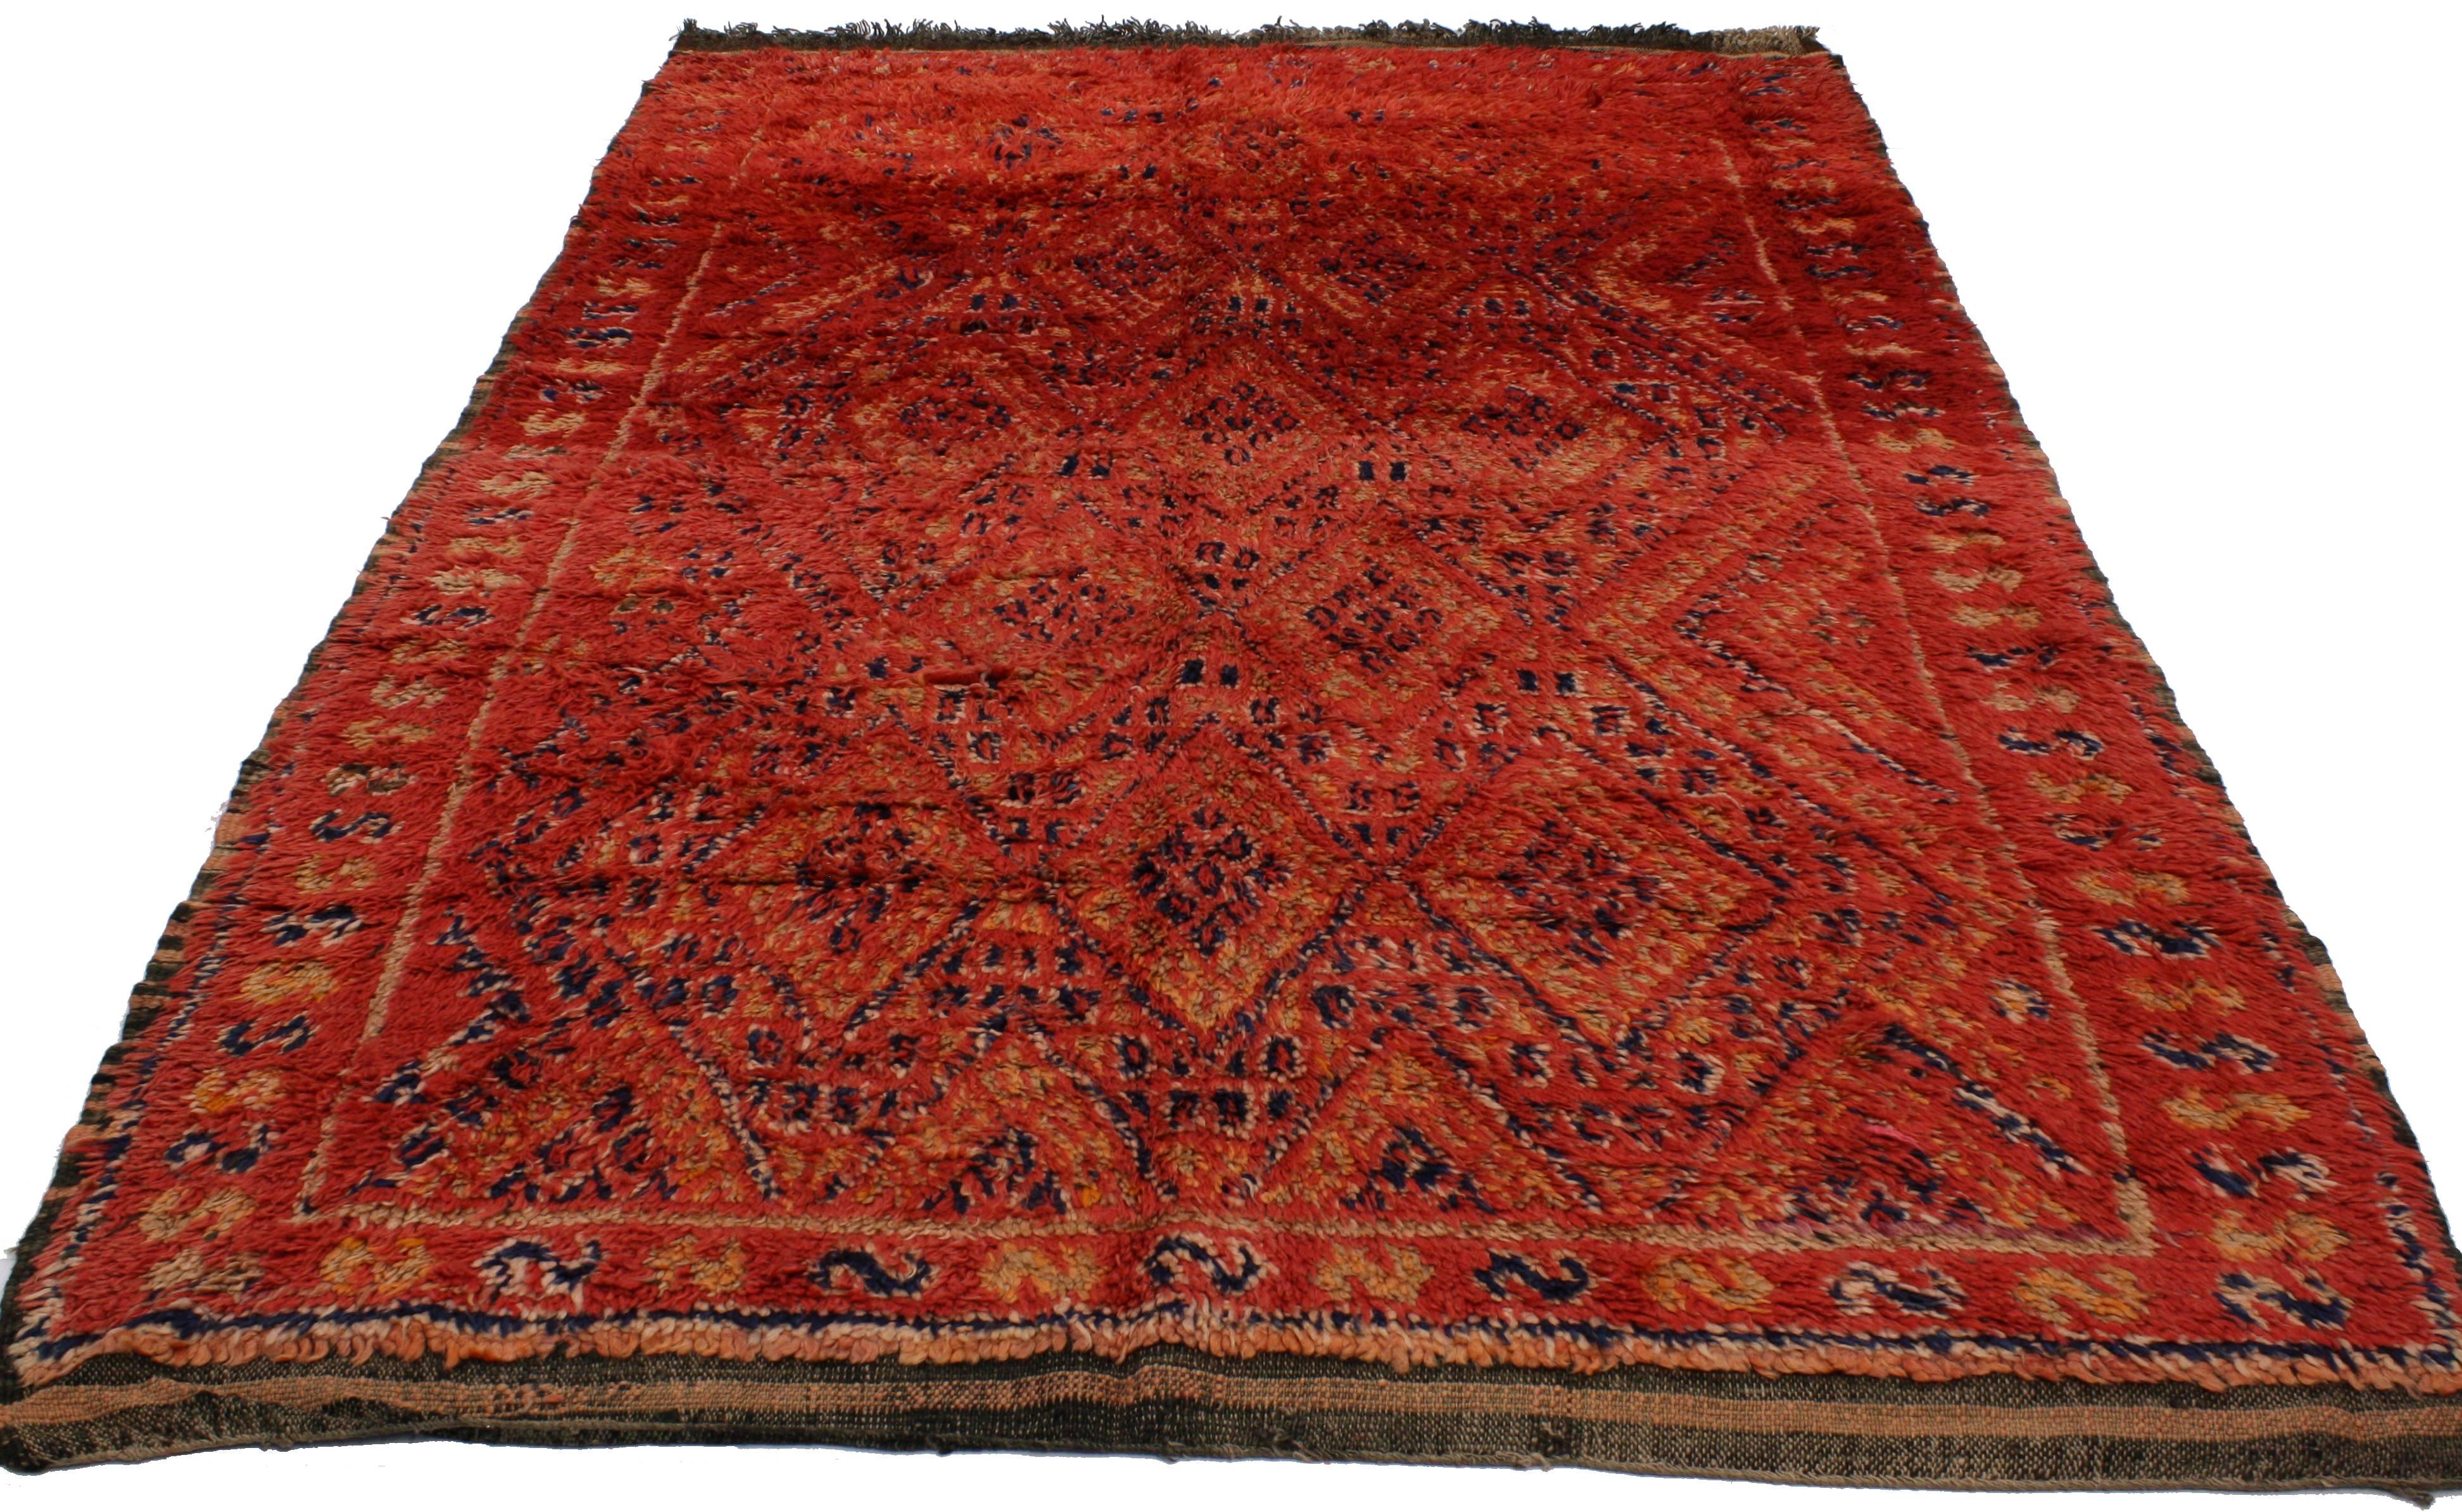 Hand-Knotted Berber Moroccan Rug with Tribal Design and Mid-Century Modern Style